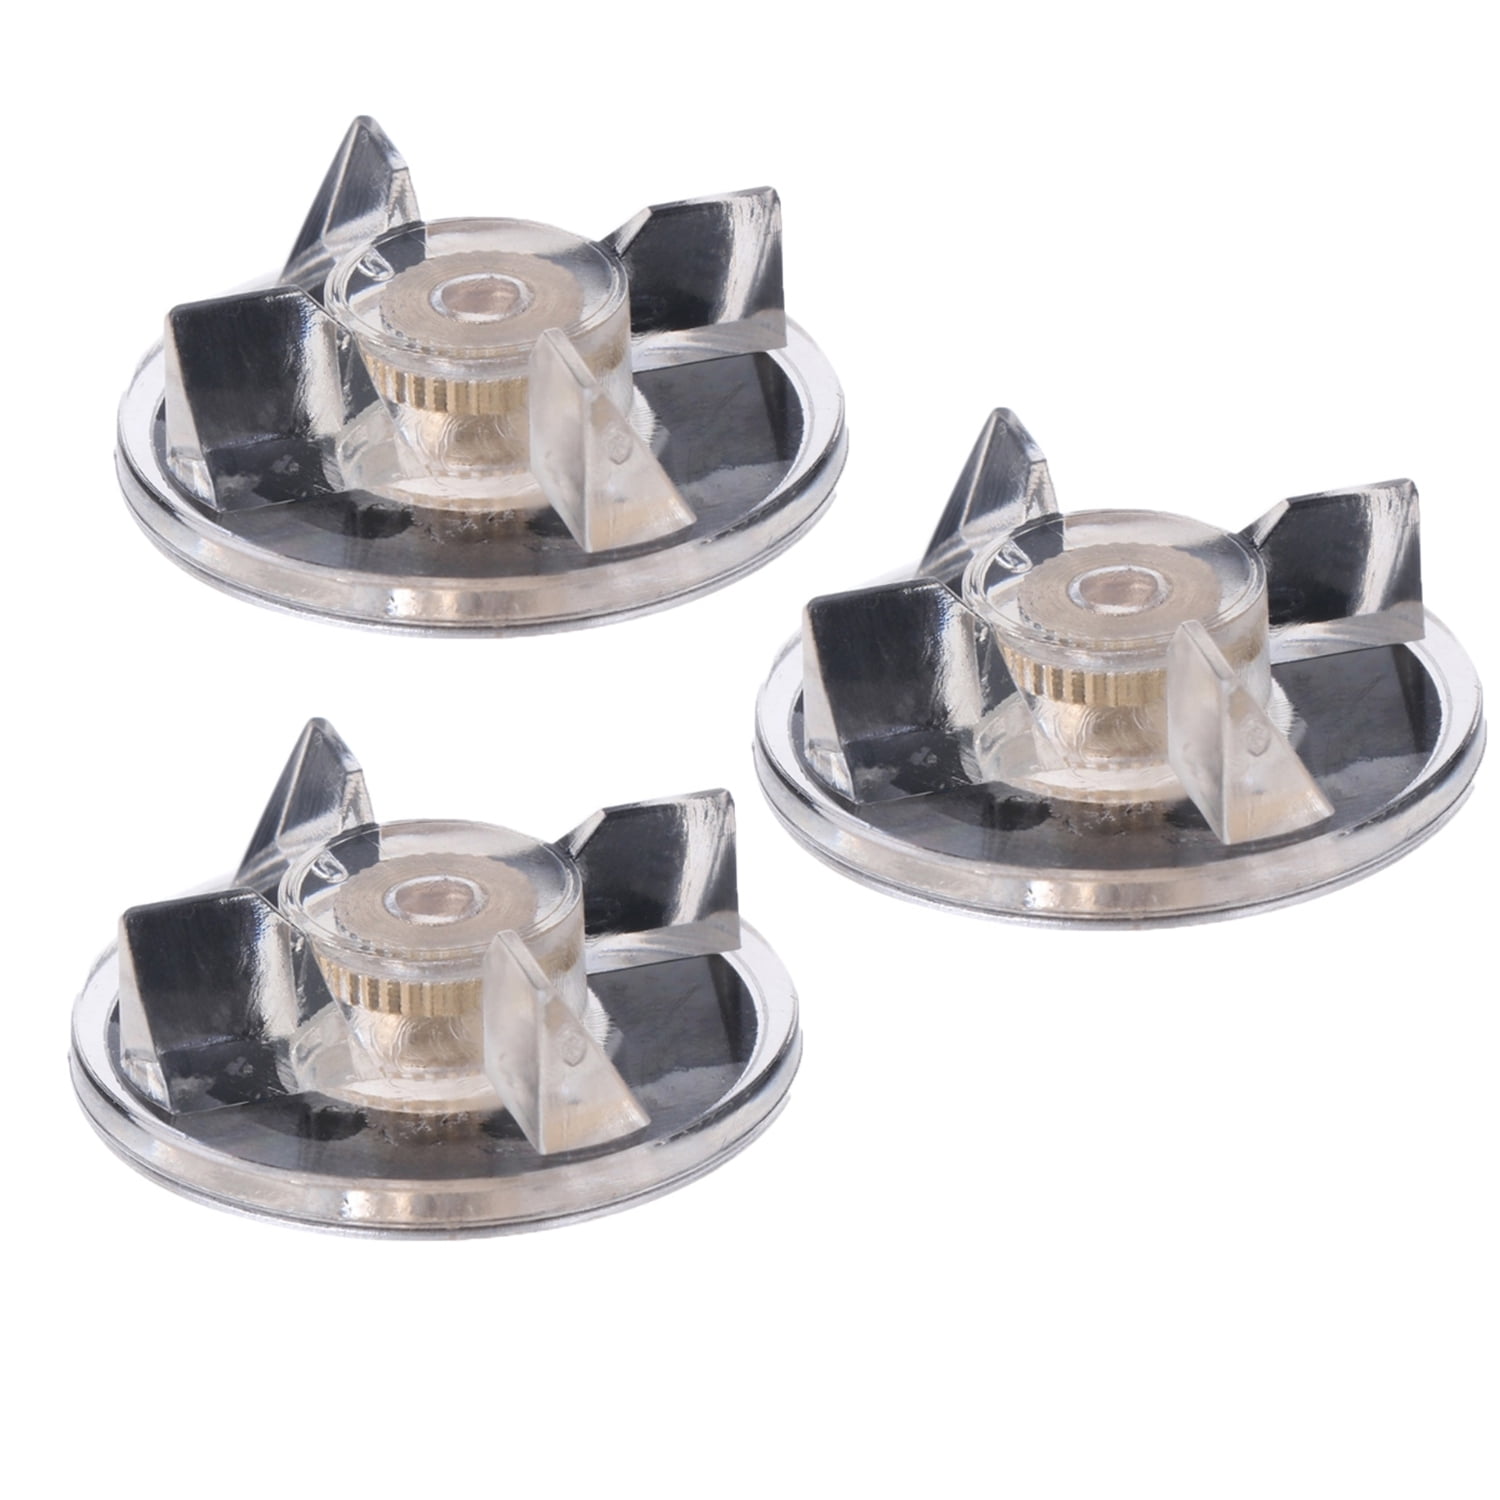 3 Pack Drive Socket Gear Replacement Part Compatible with Nutribullet RX N17-1001 1700-Watt Blenders